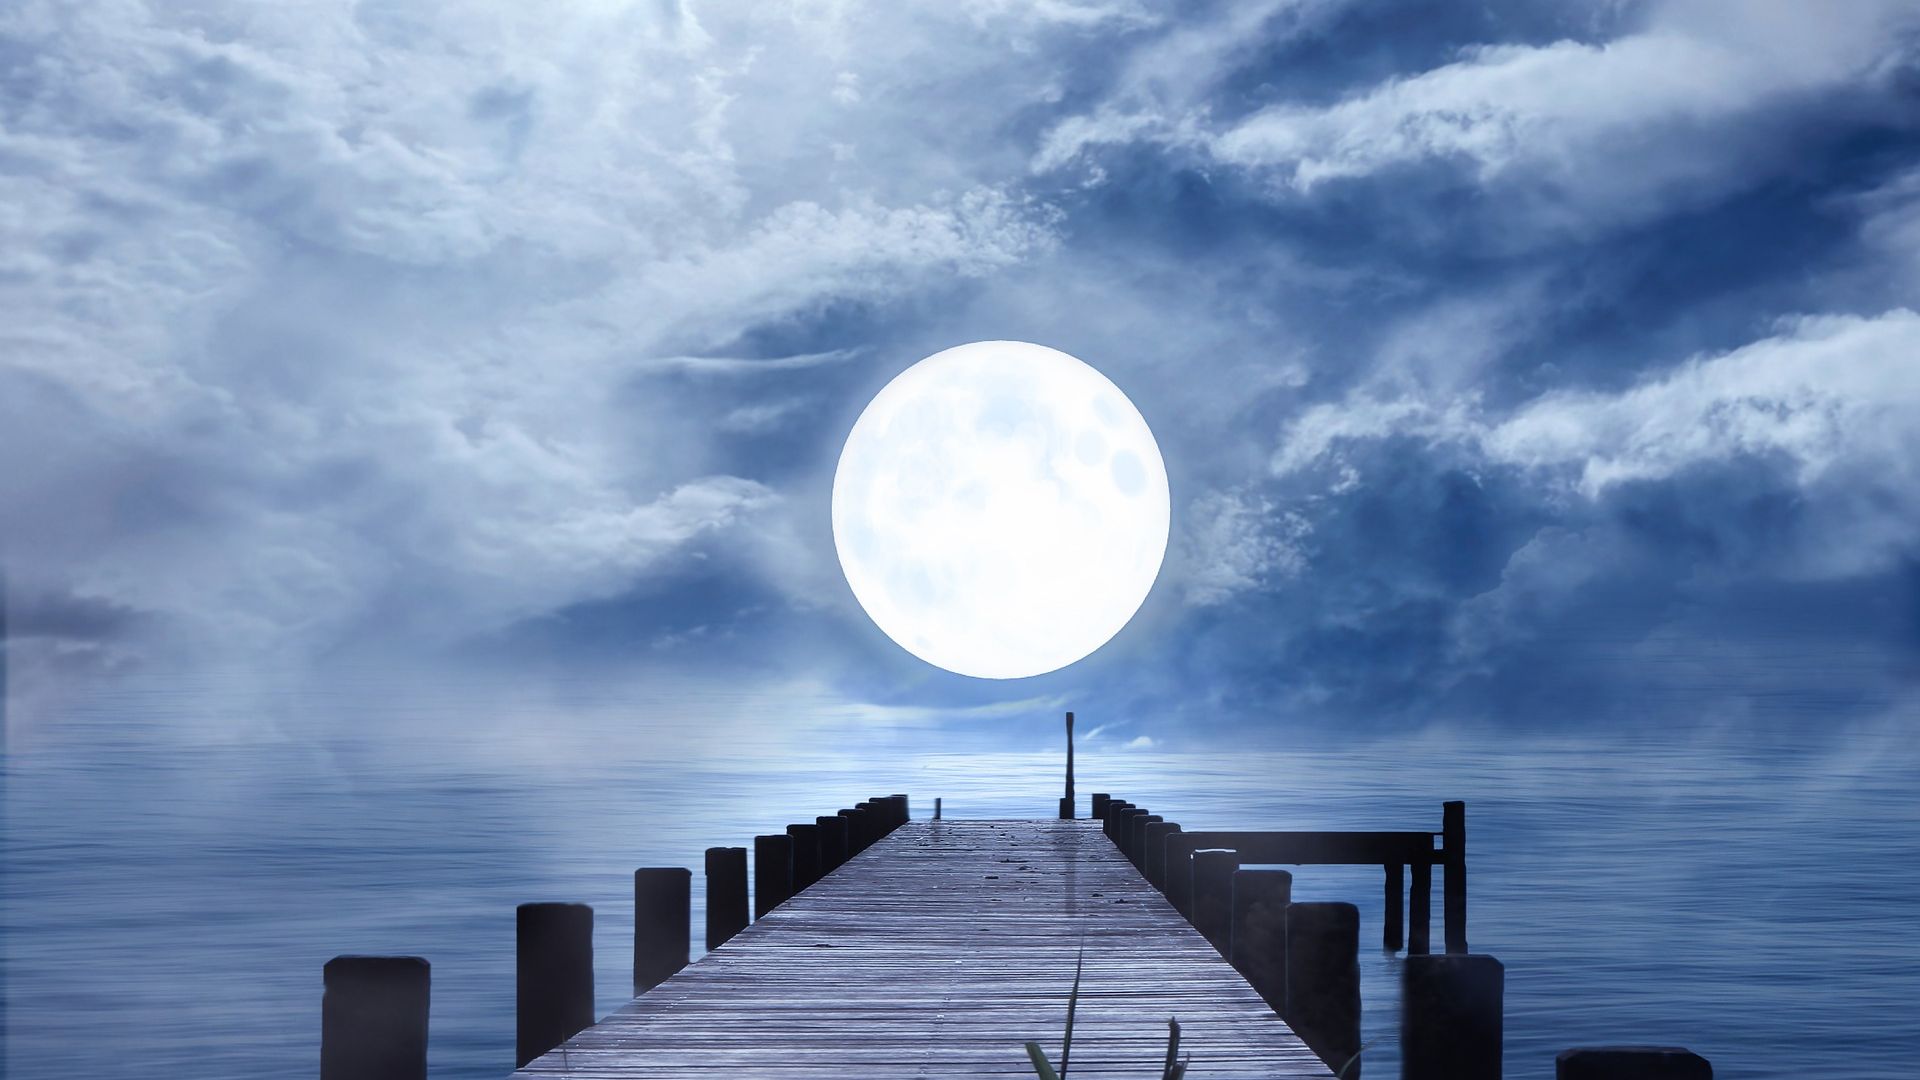 Romantic Nature And Moonlight View - Romantic Nature Images Hd - HD Wallpaper 